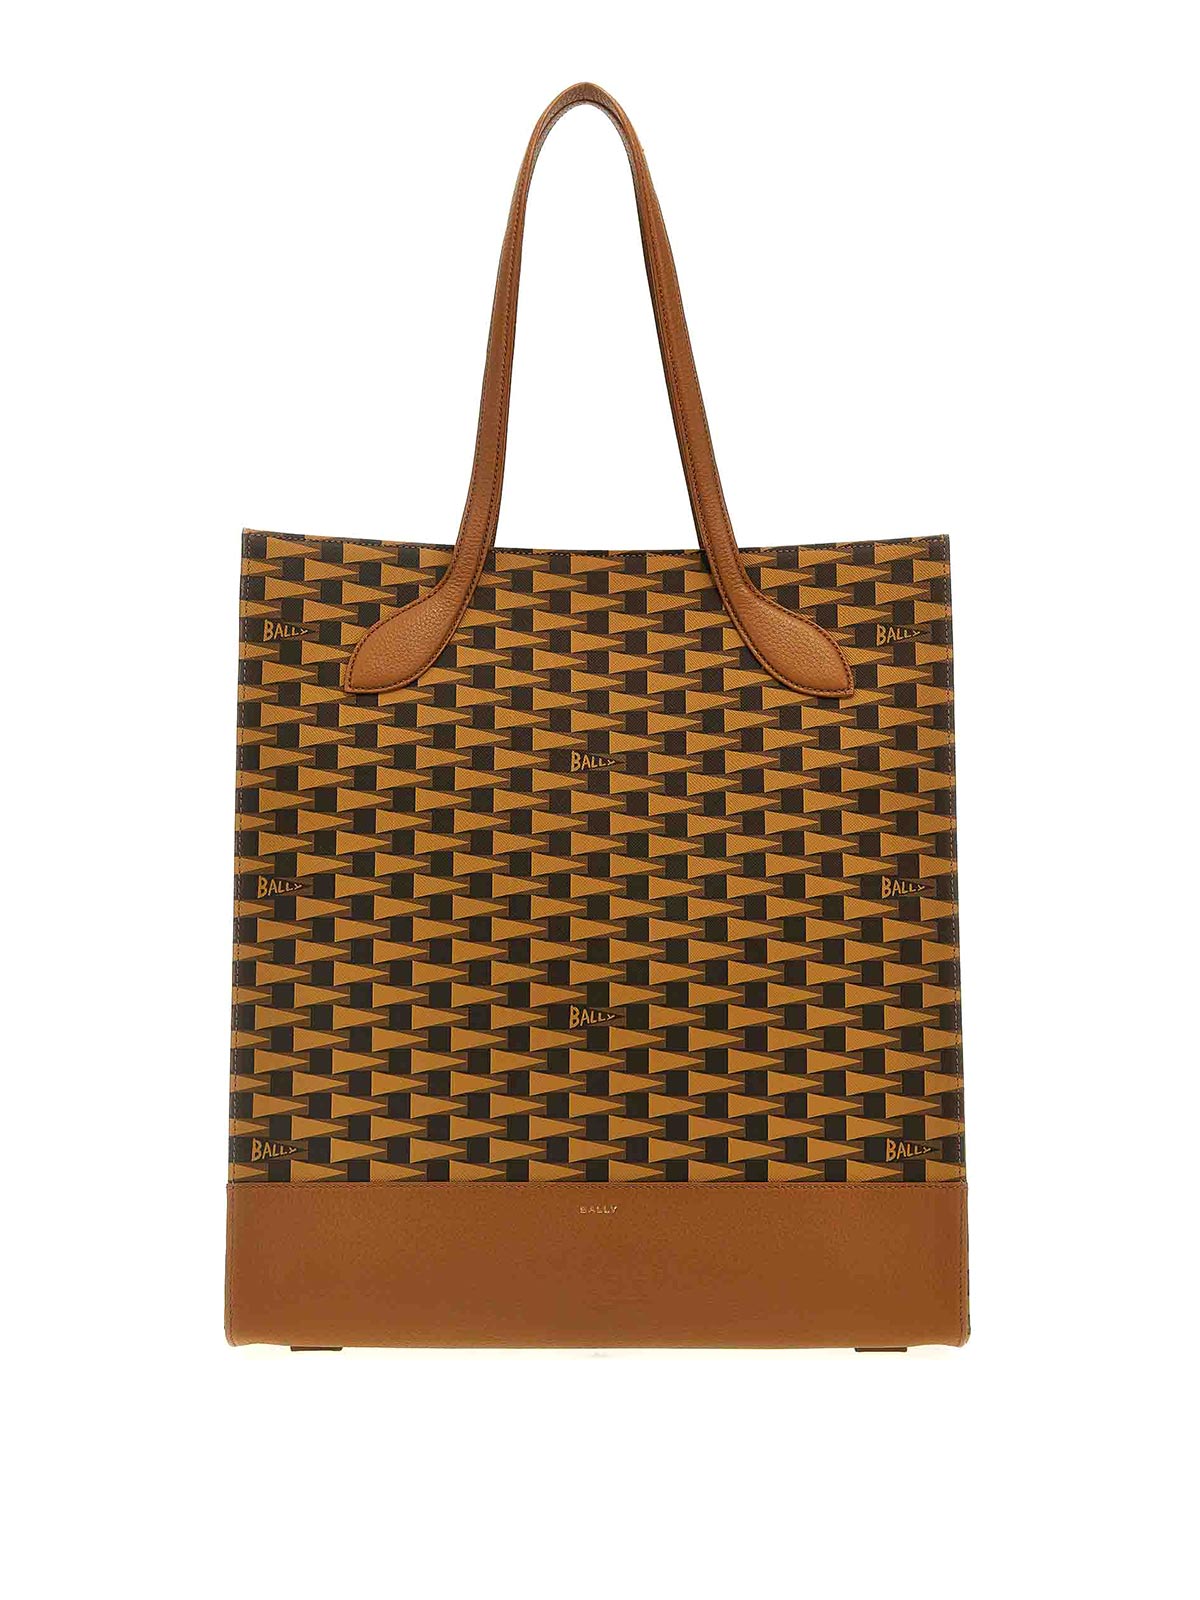 Bally Keep On Shopping Bag In Brown